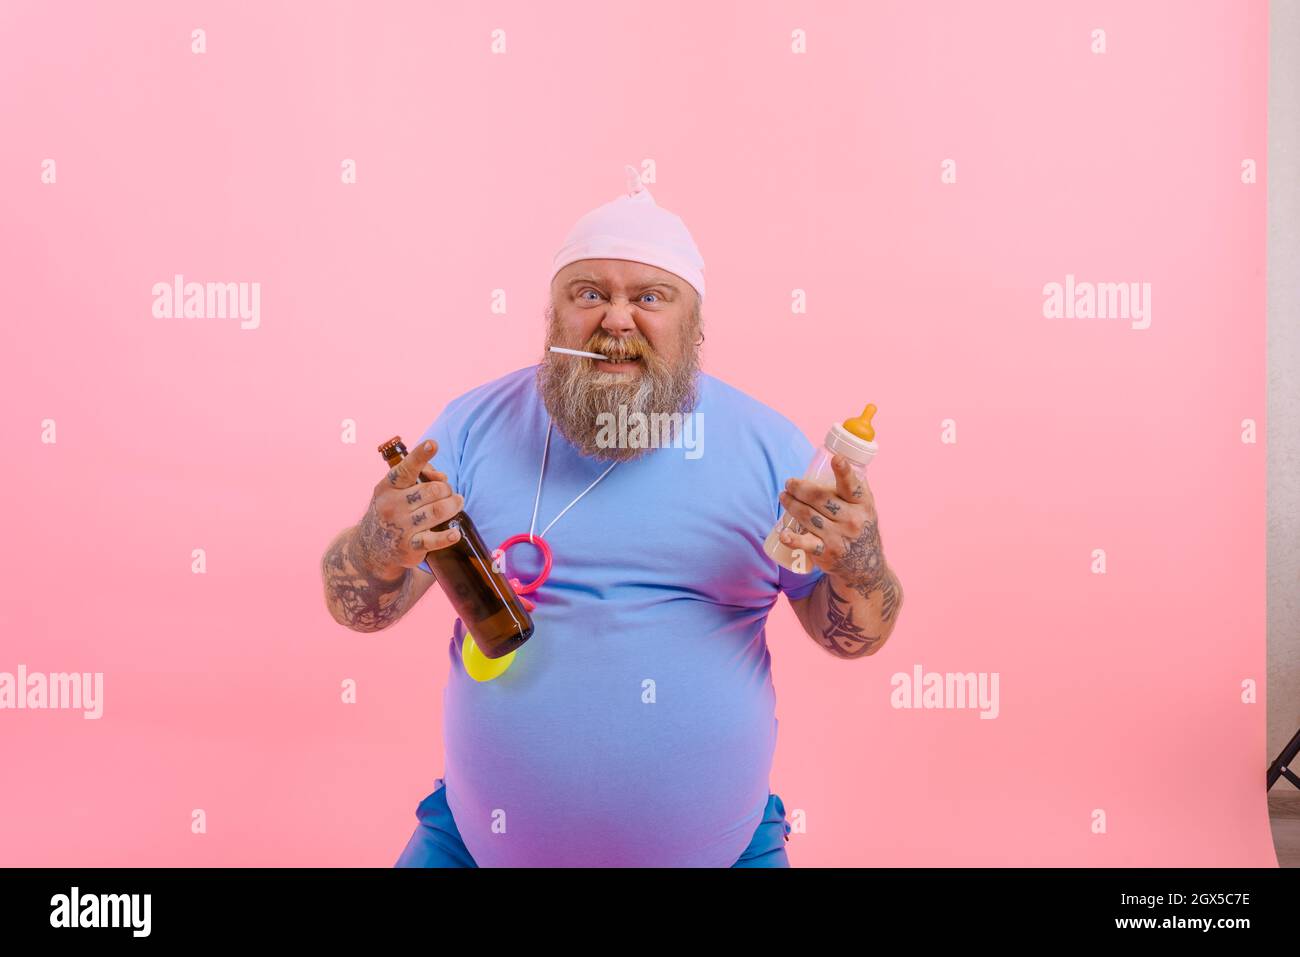 Fat angry man acts like a angry baby but drinks beer Stock Photo